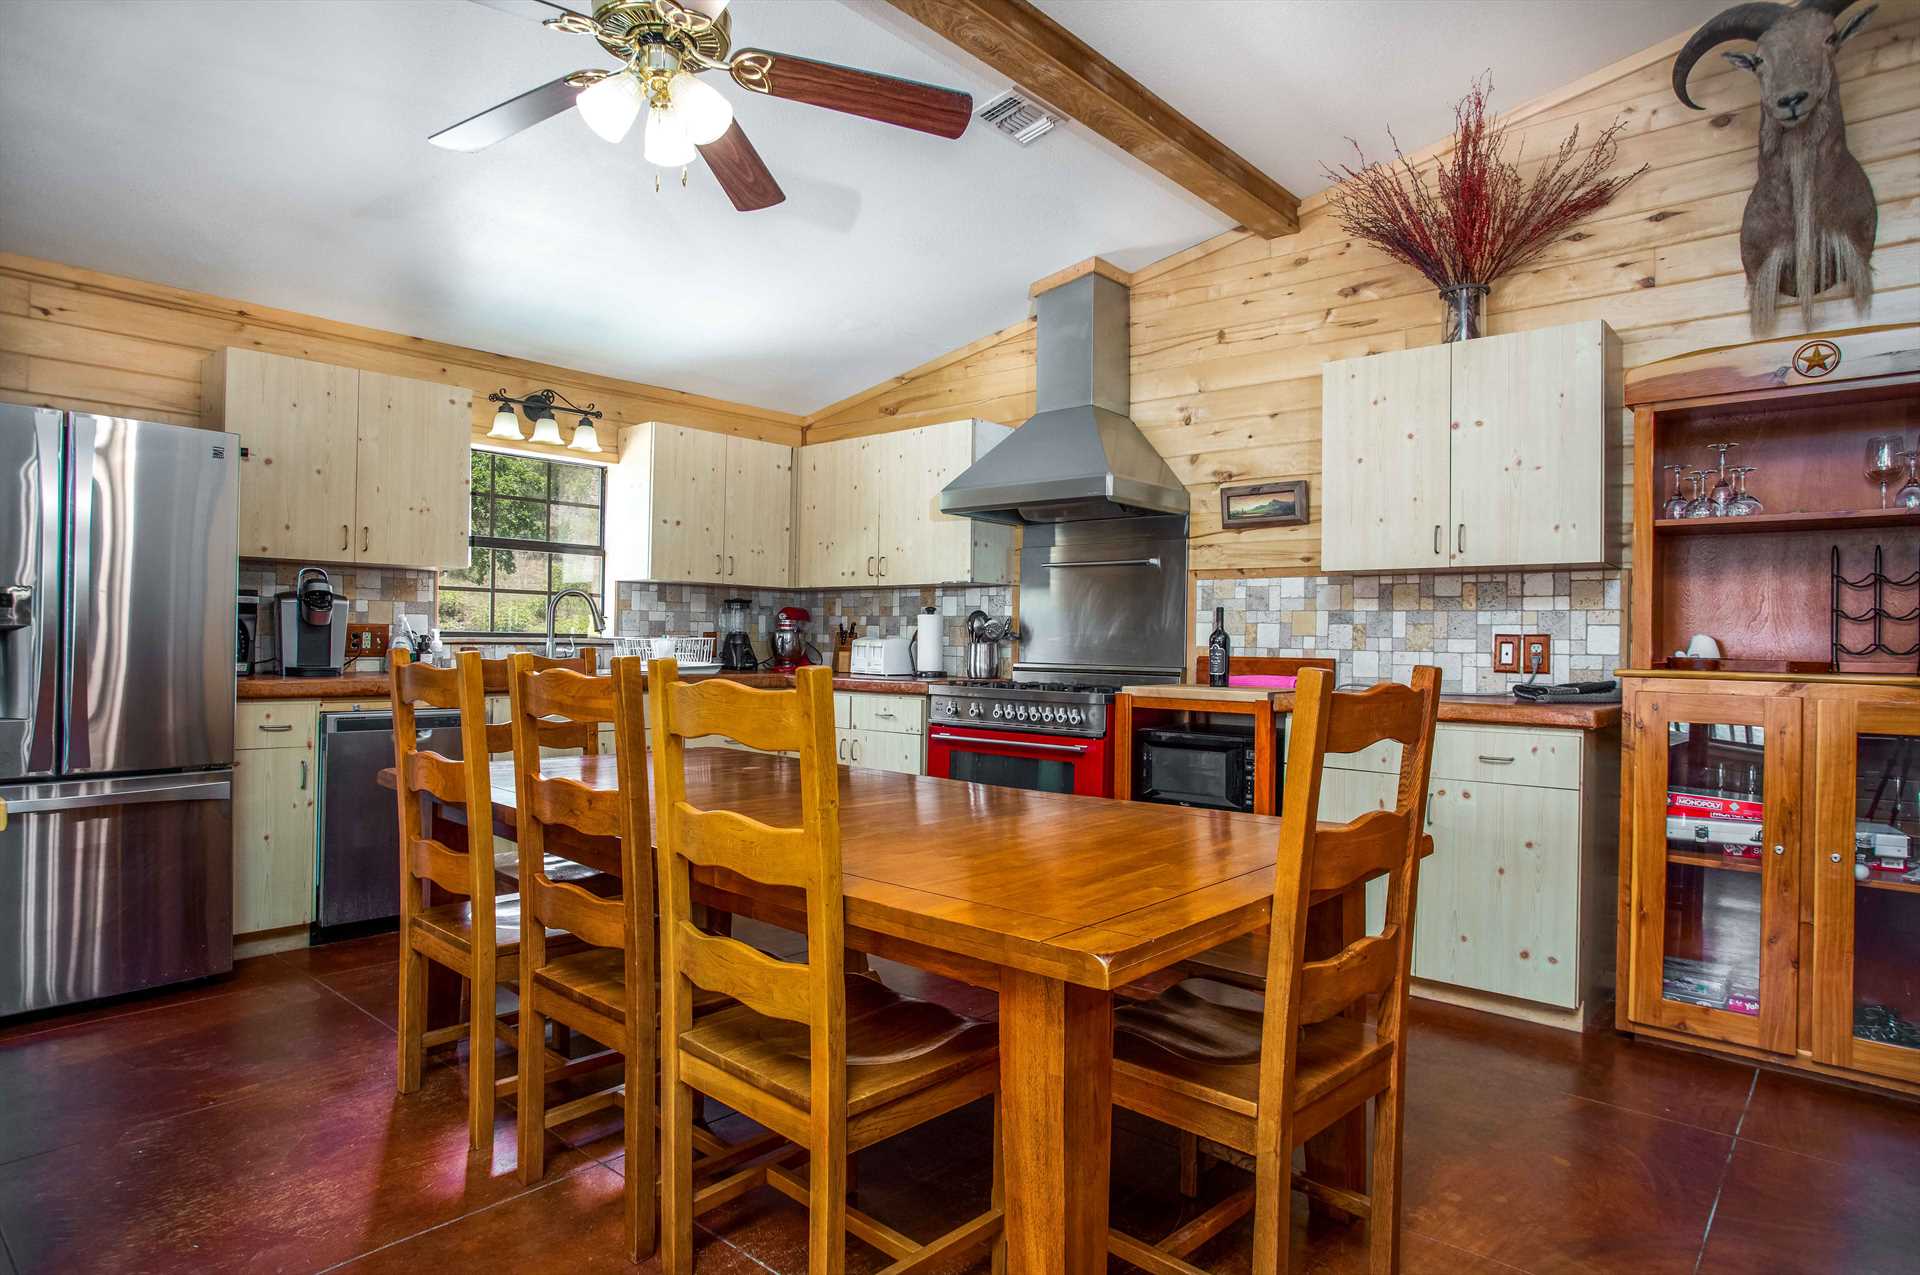                                                 The kitchen and dining area at the Lodge provide plenty of space for food prep and comfortable sit-down dining.